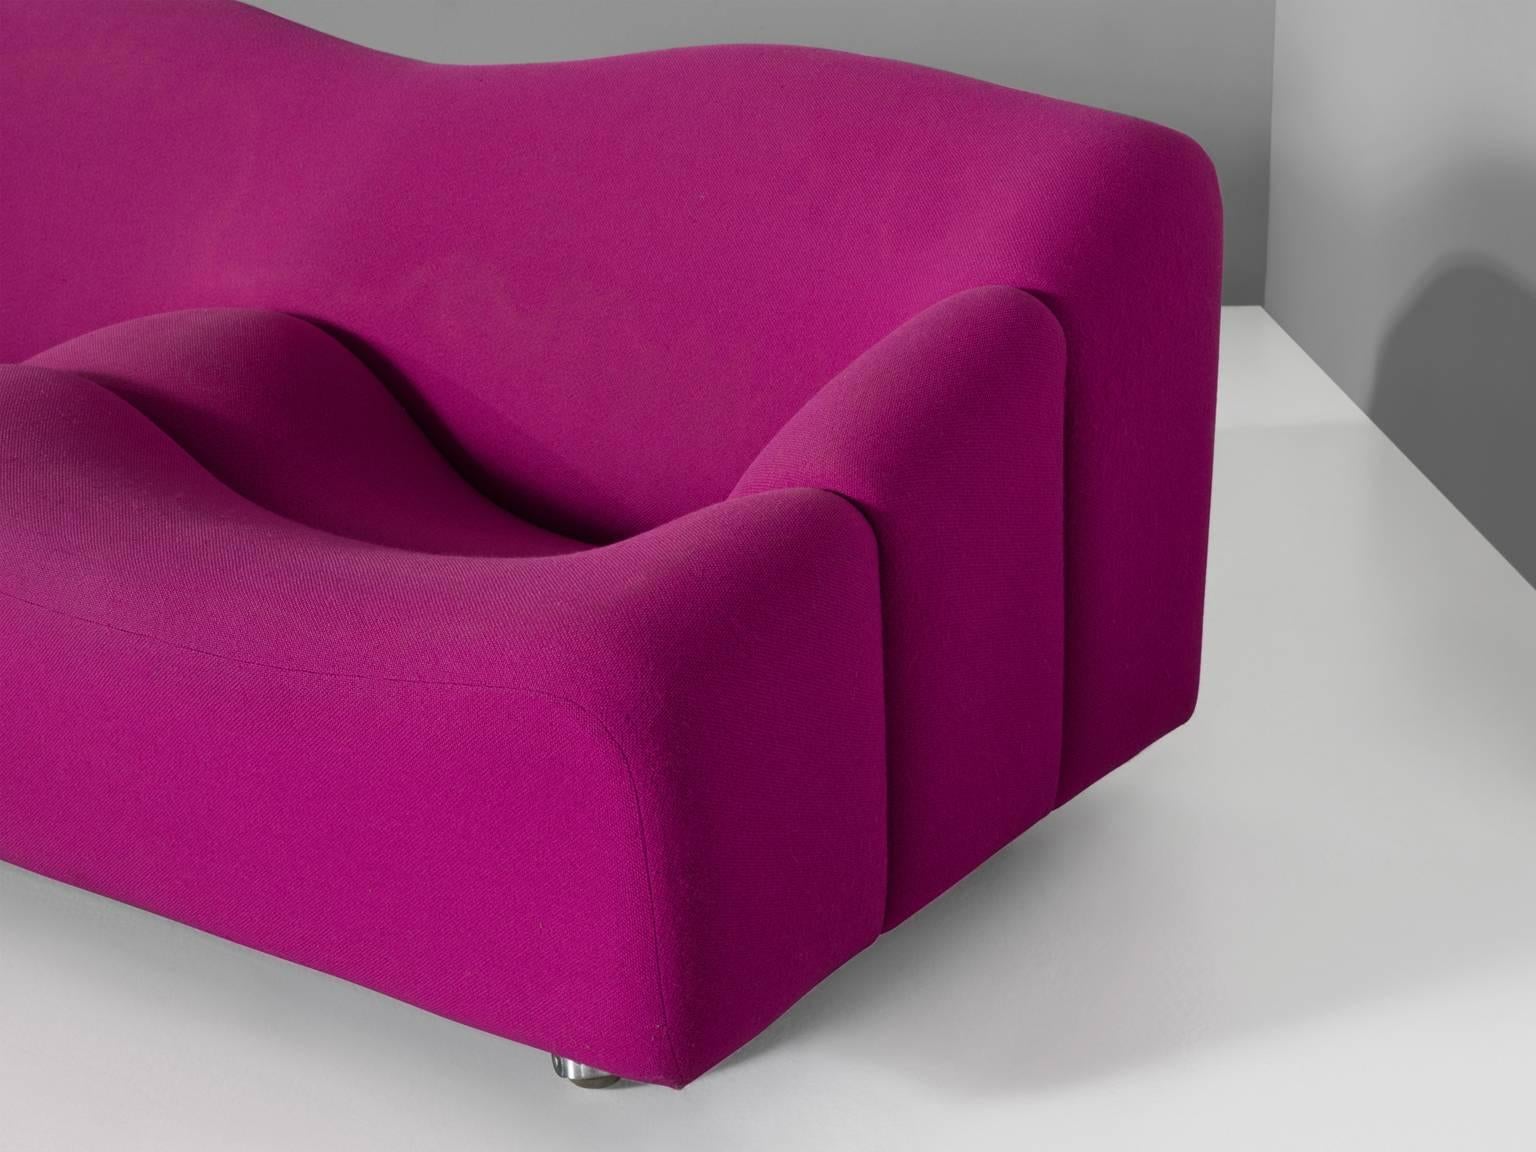 Metal Pierre Paulin Two-Seat Sofa in Pink from the ABCD Series for Artifort